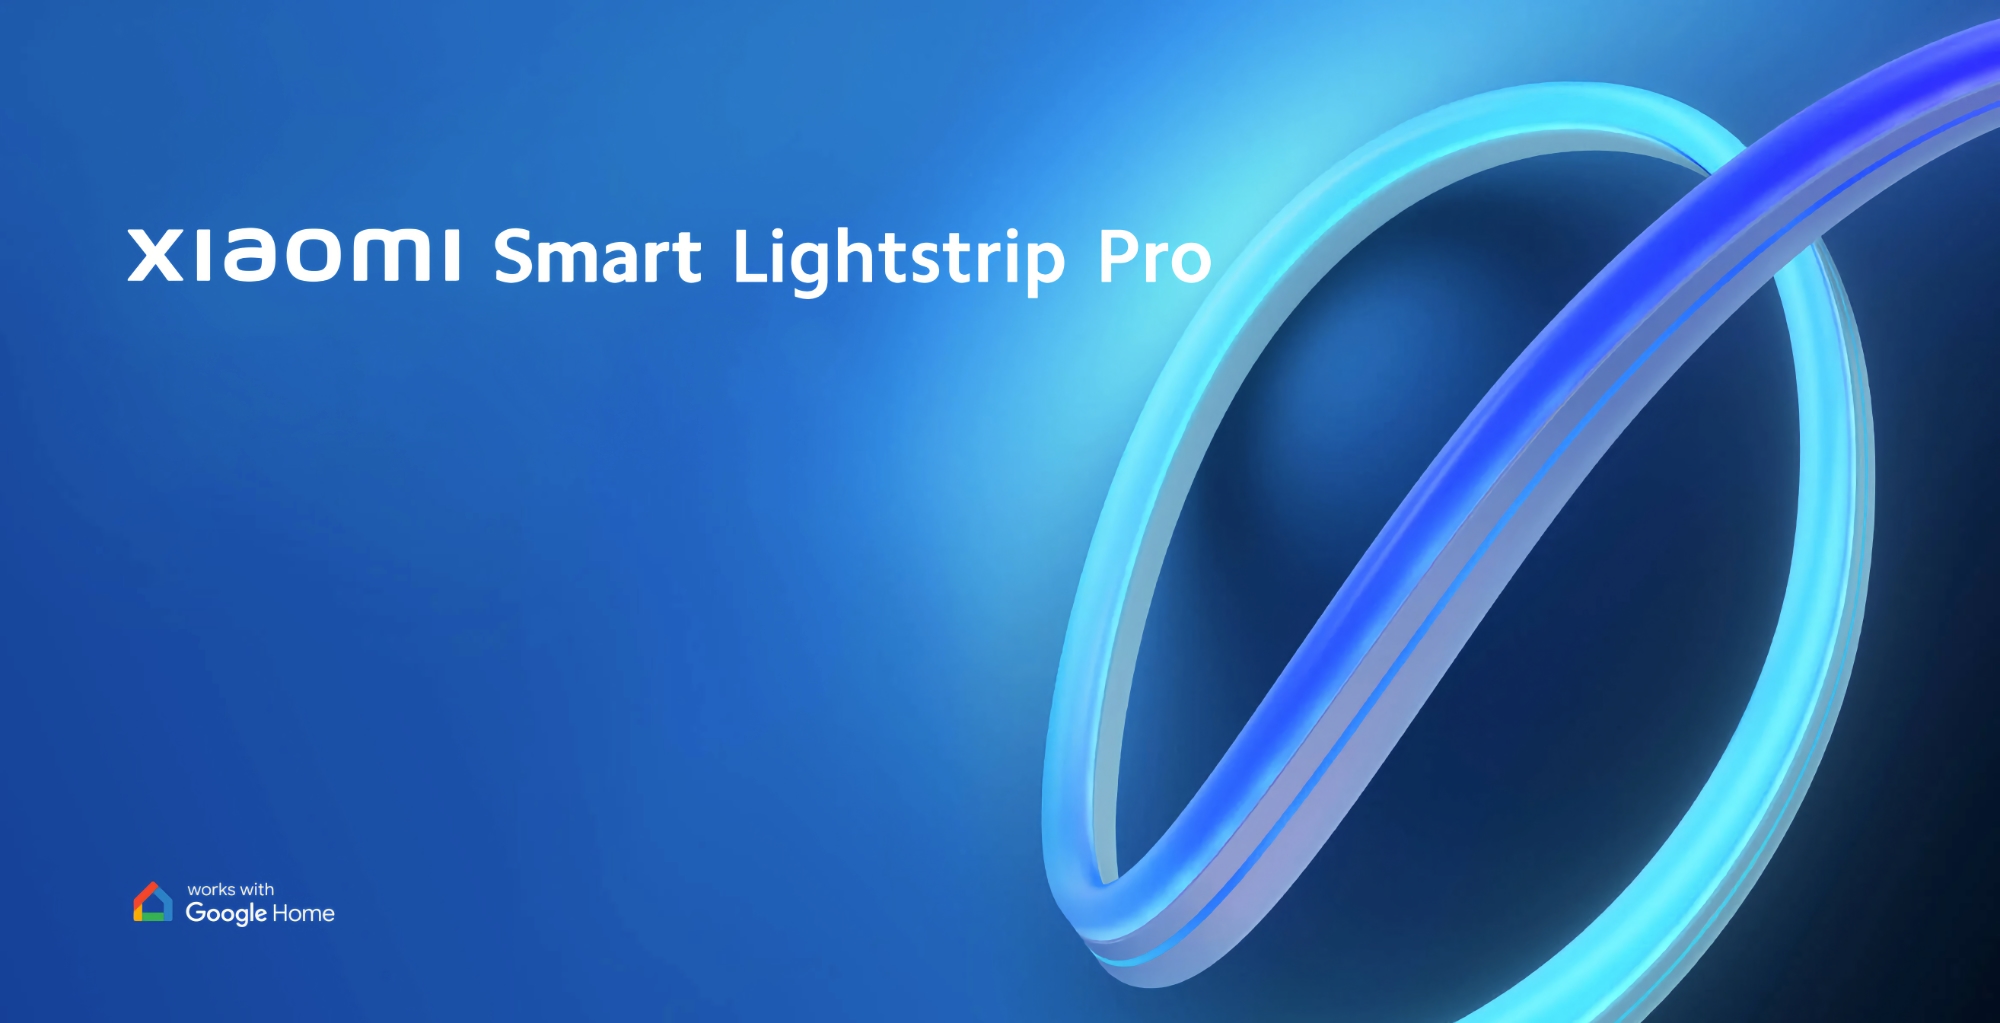 Xiaomi introduced Smart Lightstrip Pro in Europe: RGB tape with Google Home support for 69 euros